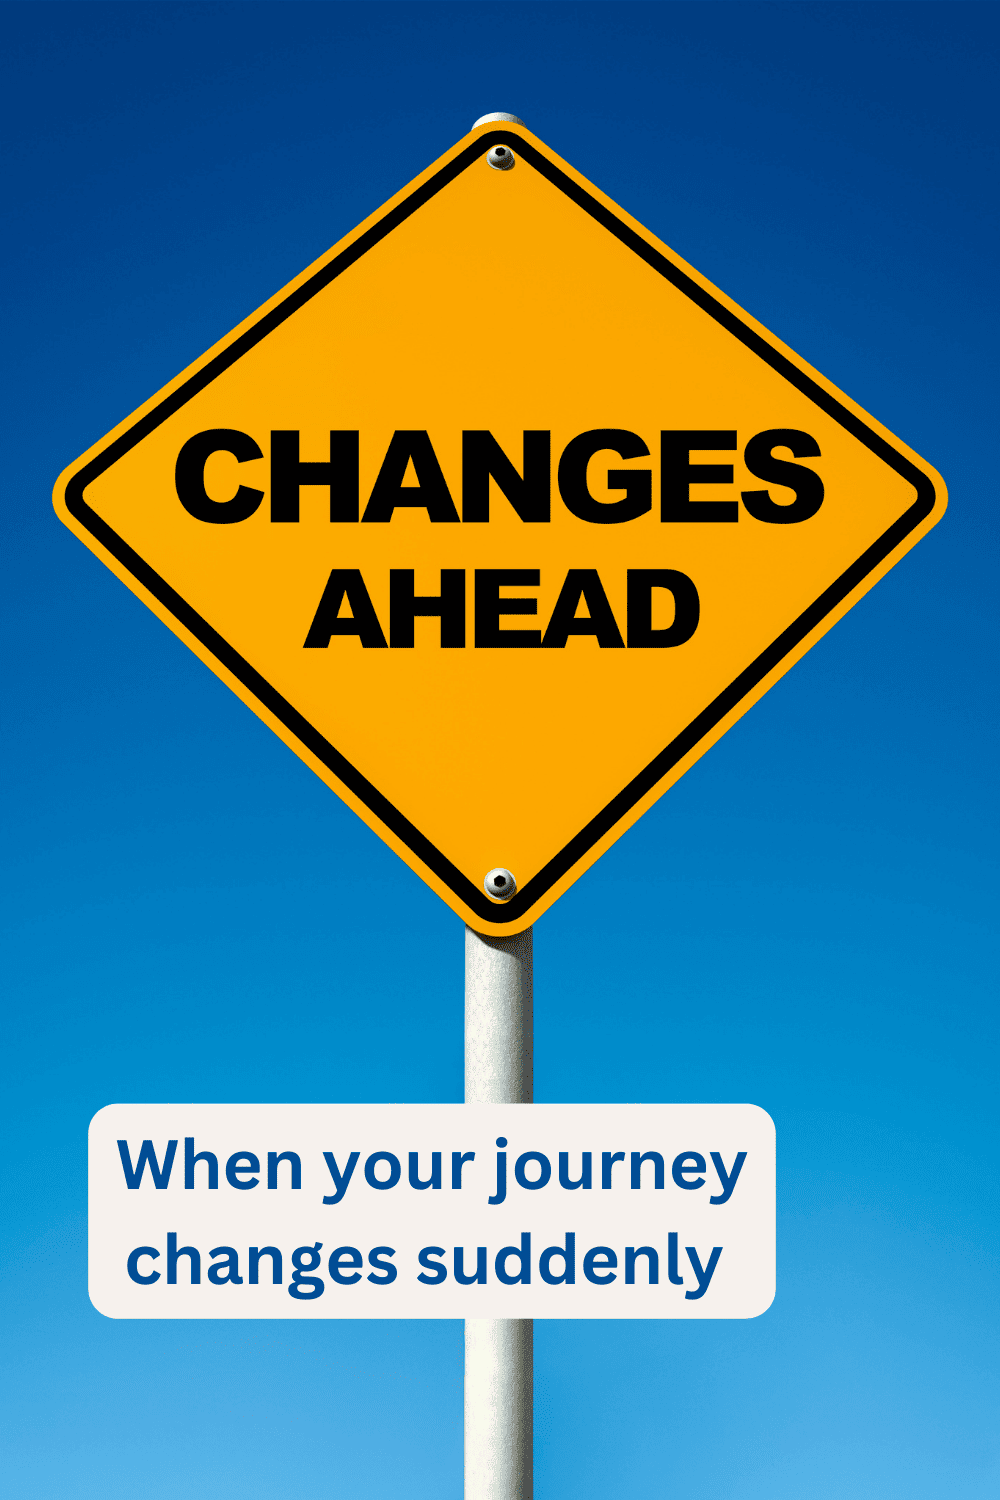 When your journey changes suddenly